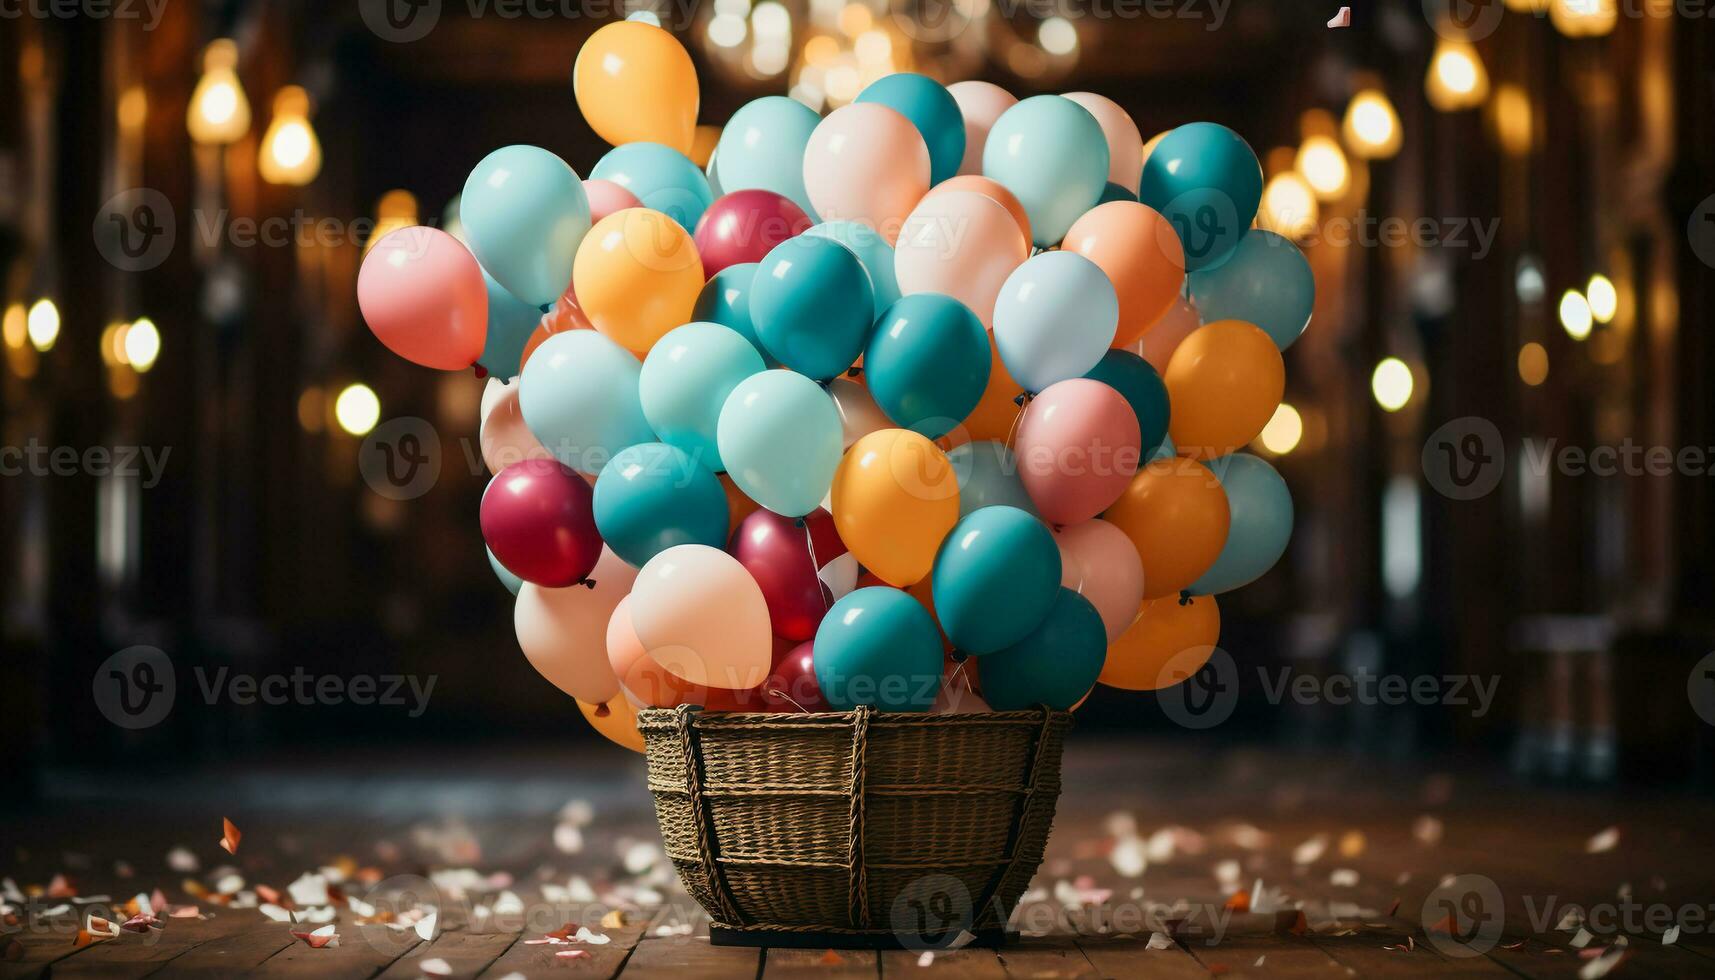 A vibrant bunch of balloons illuminate a cheerful celebration event generated by AI photo